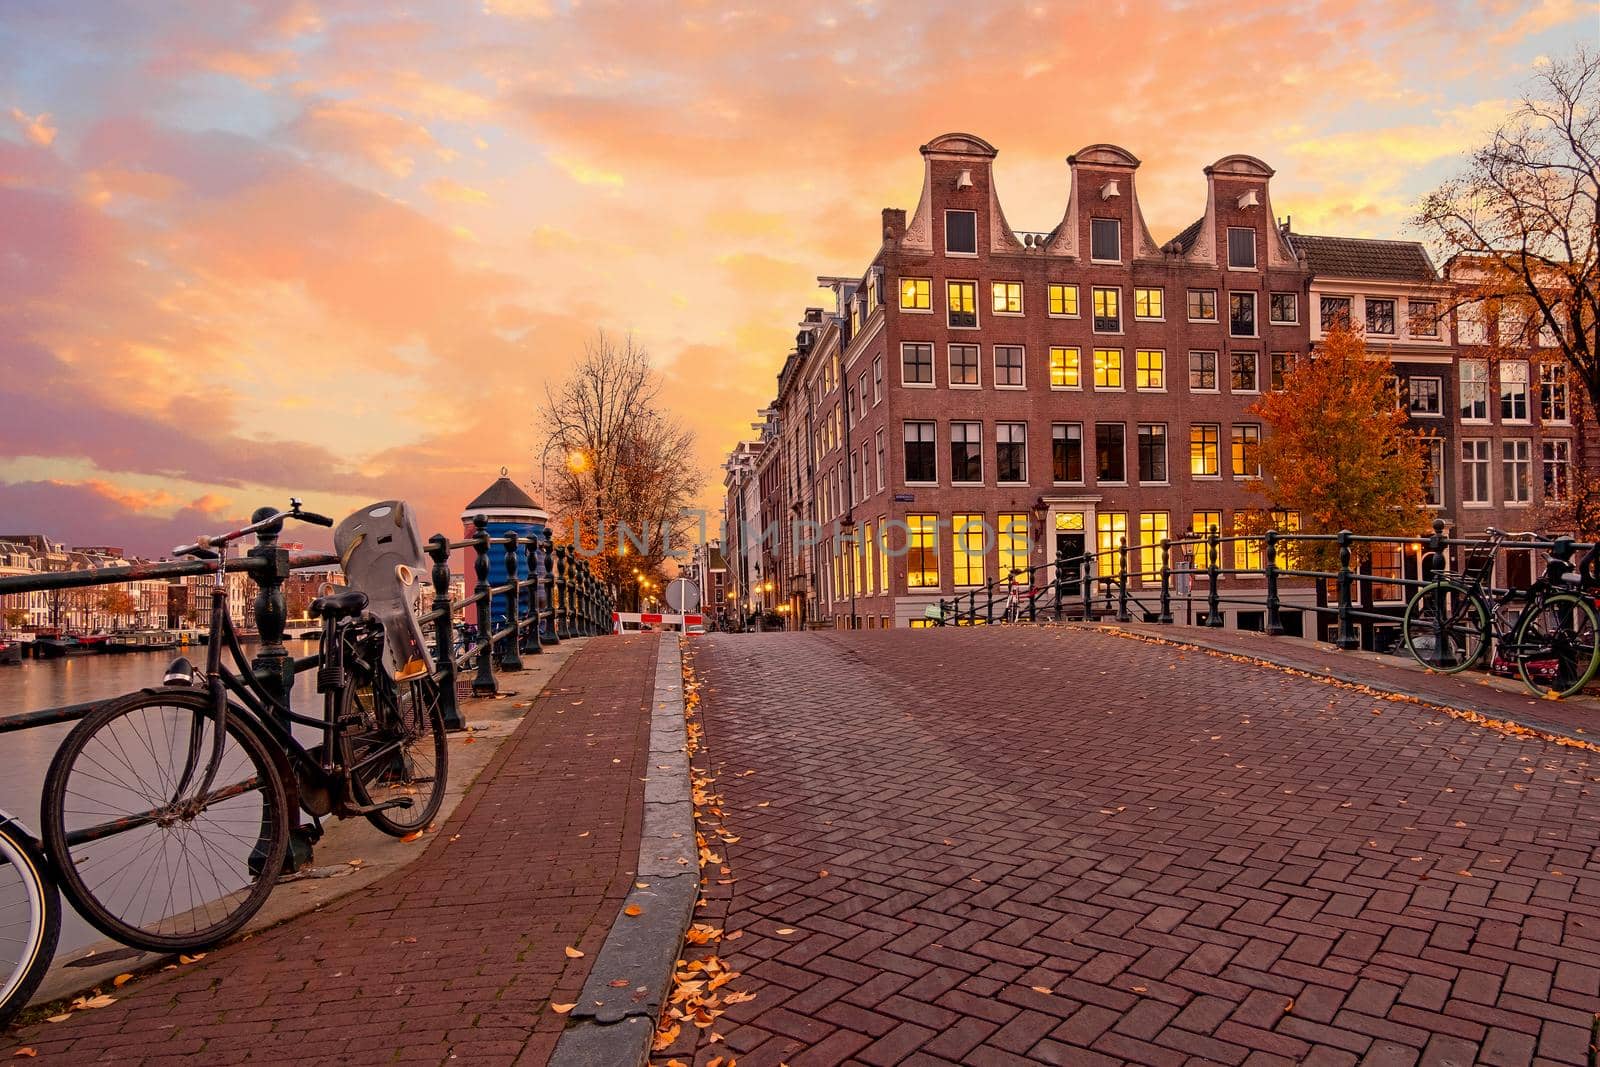 City scenic from Amsterdam at the Amstel in the Netherlands at sunset by devy